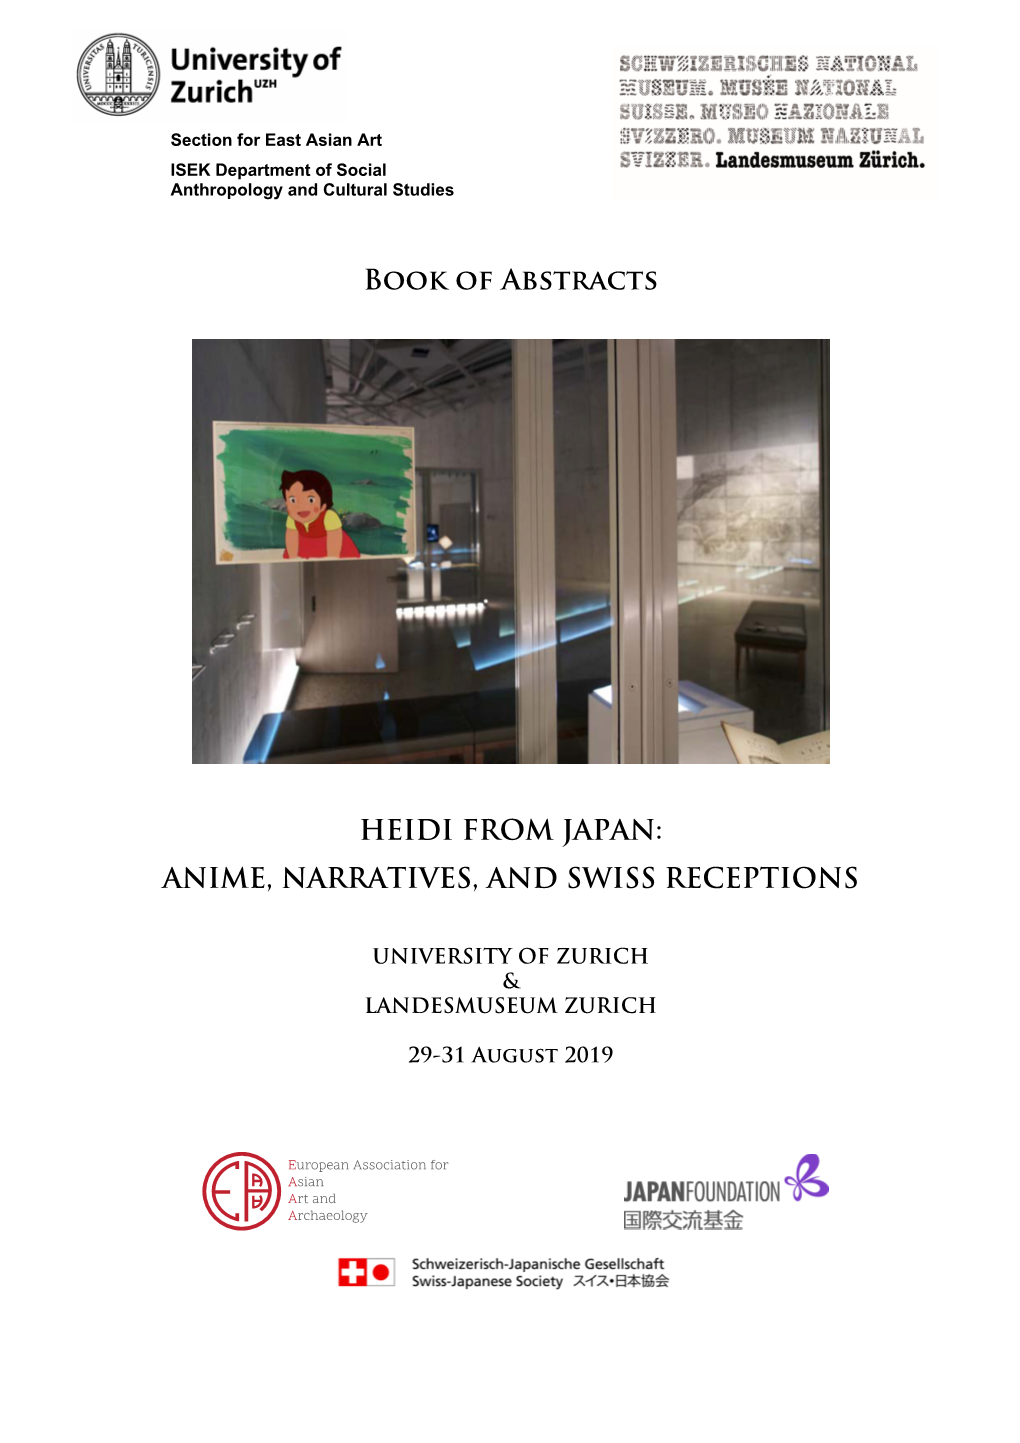 Book of Abstracts HEIDI from JAPAN: ANIME, NARRATIVES, AND